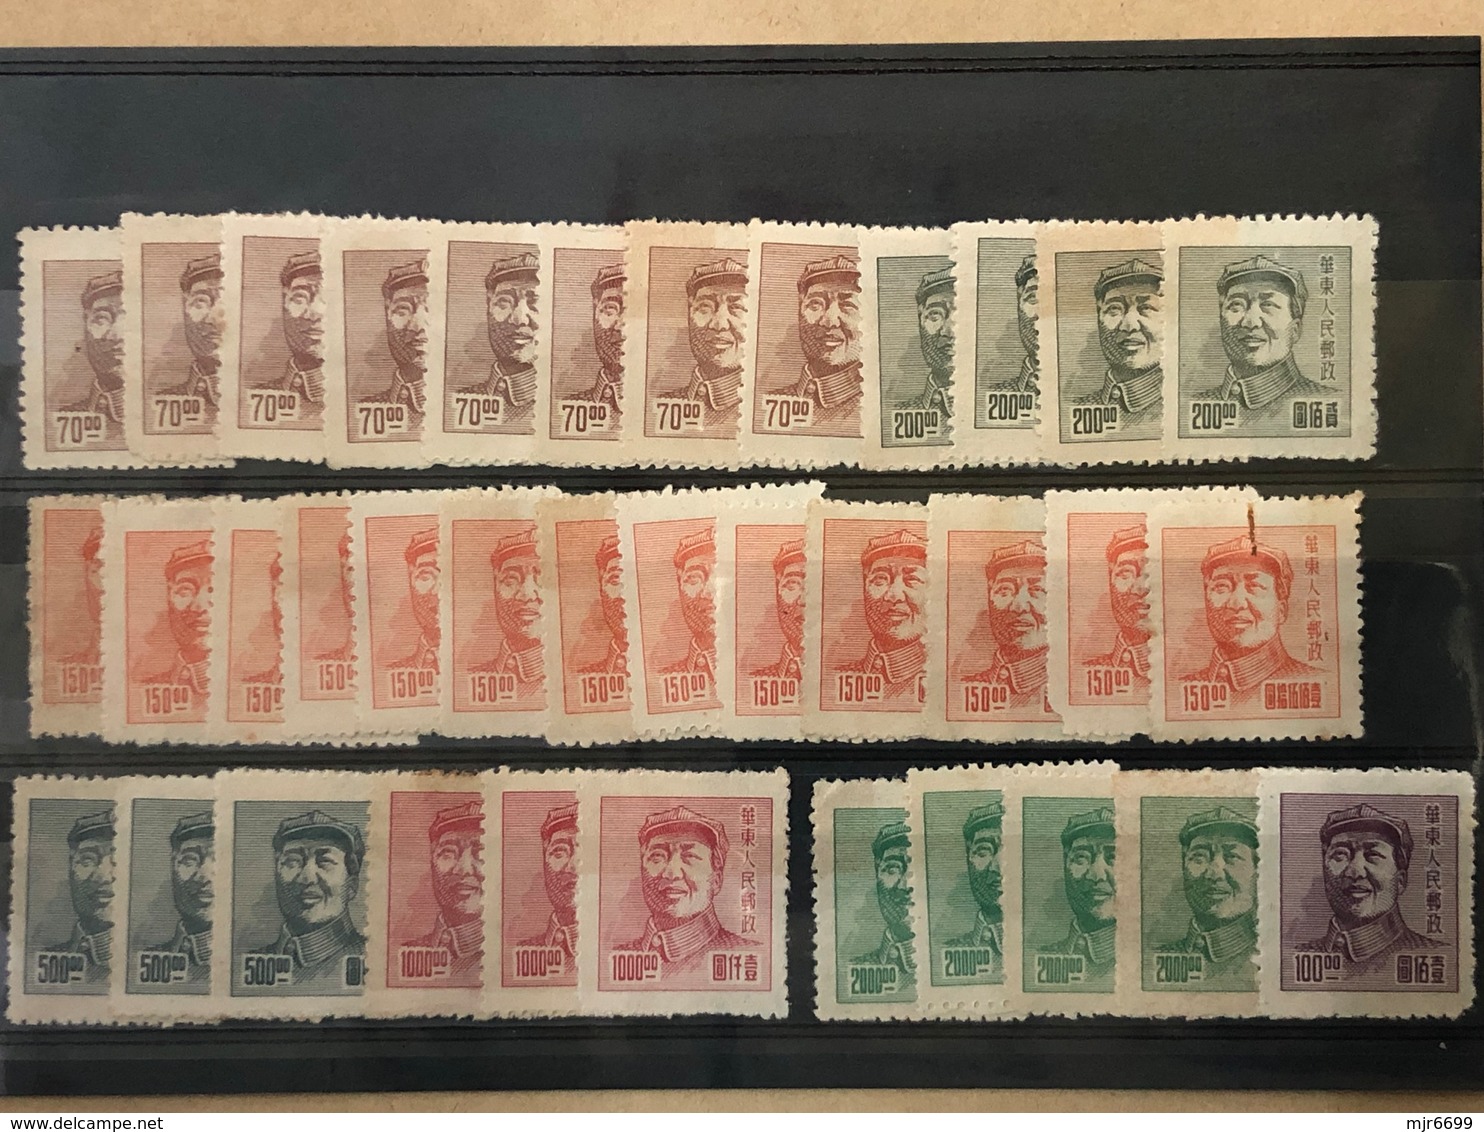 LOT OF 45 STAMPS UNUSED NO GUM AS ISSUED SOME WITH STAINS AND SOME VARIETIES - Nordostchina 1946-48